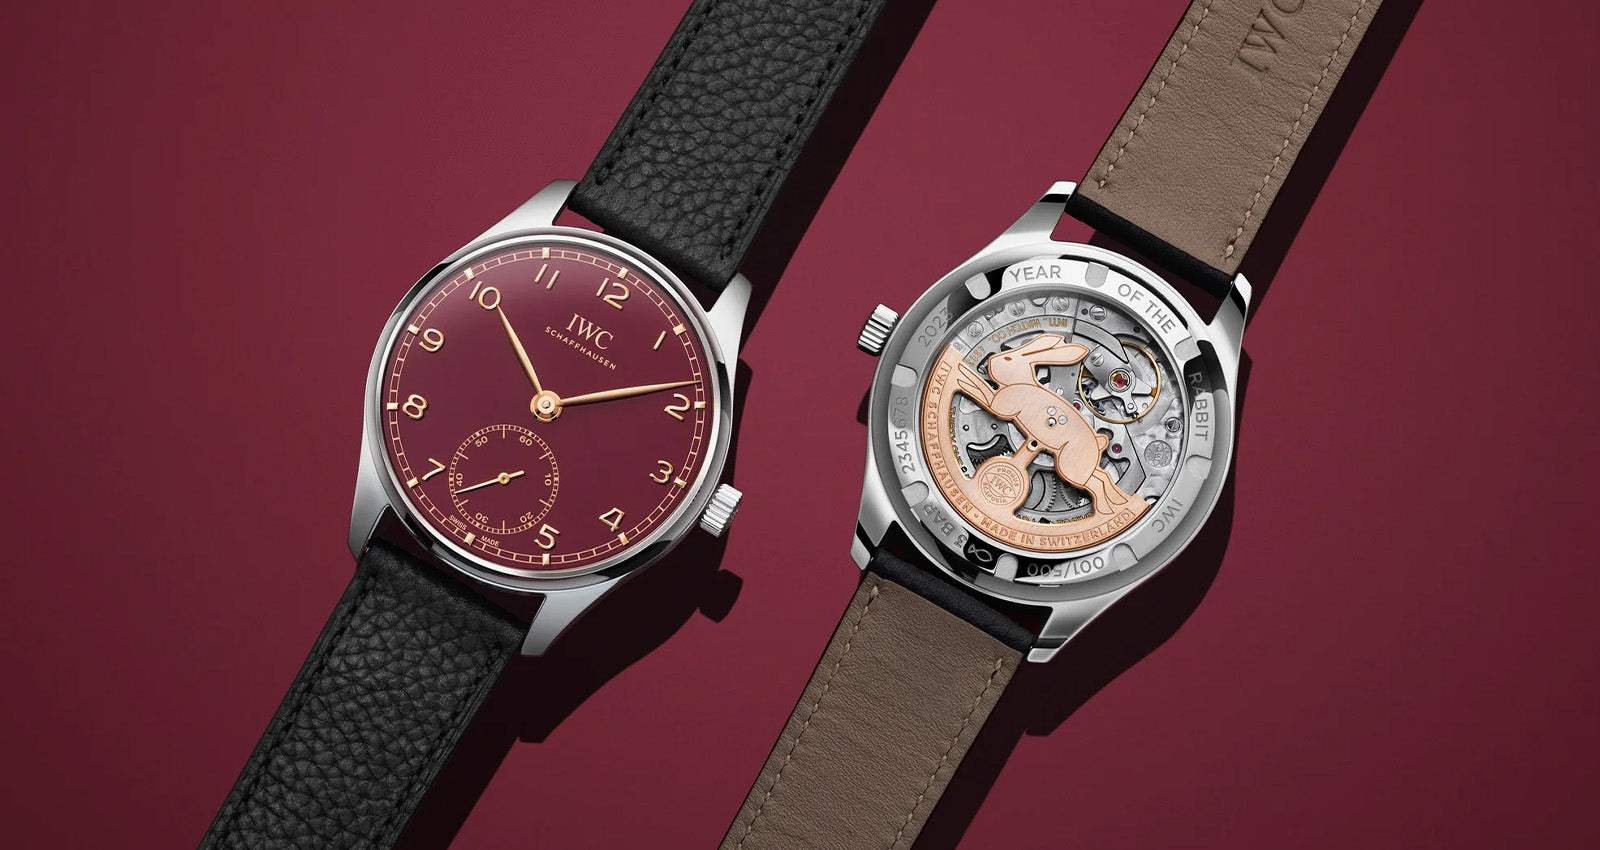 For Him: Styling Luxury Watches Exclusive To The Year Of The Rabbit